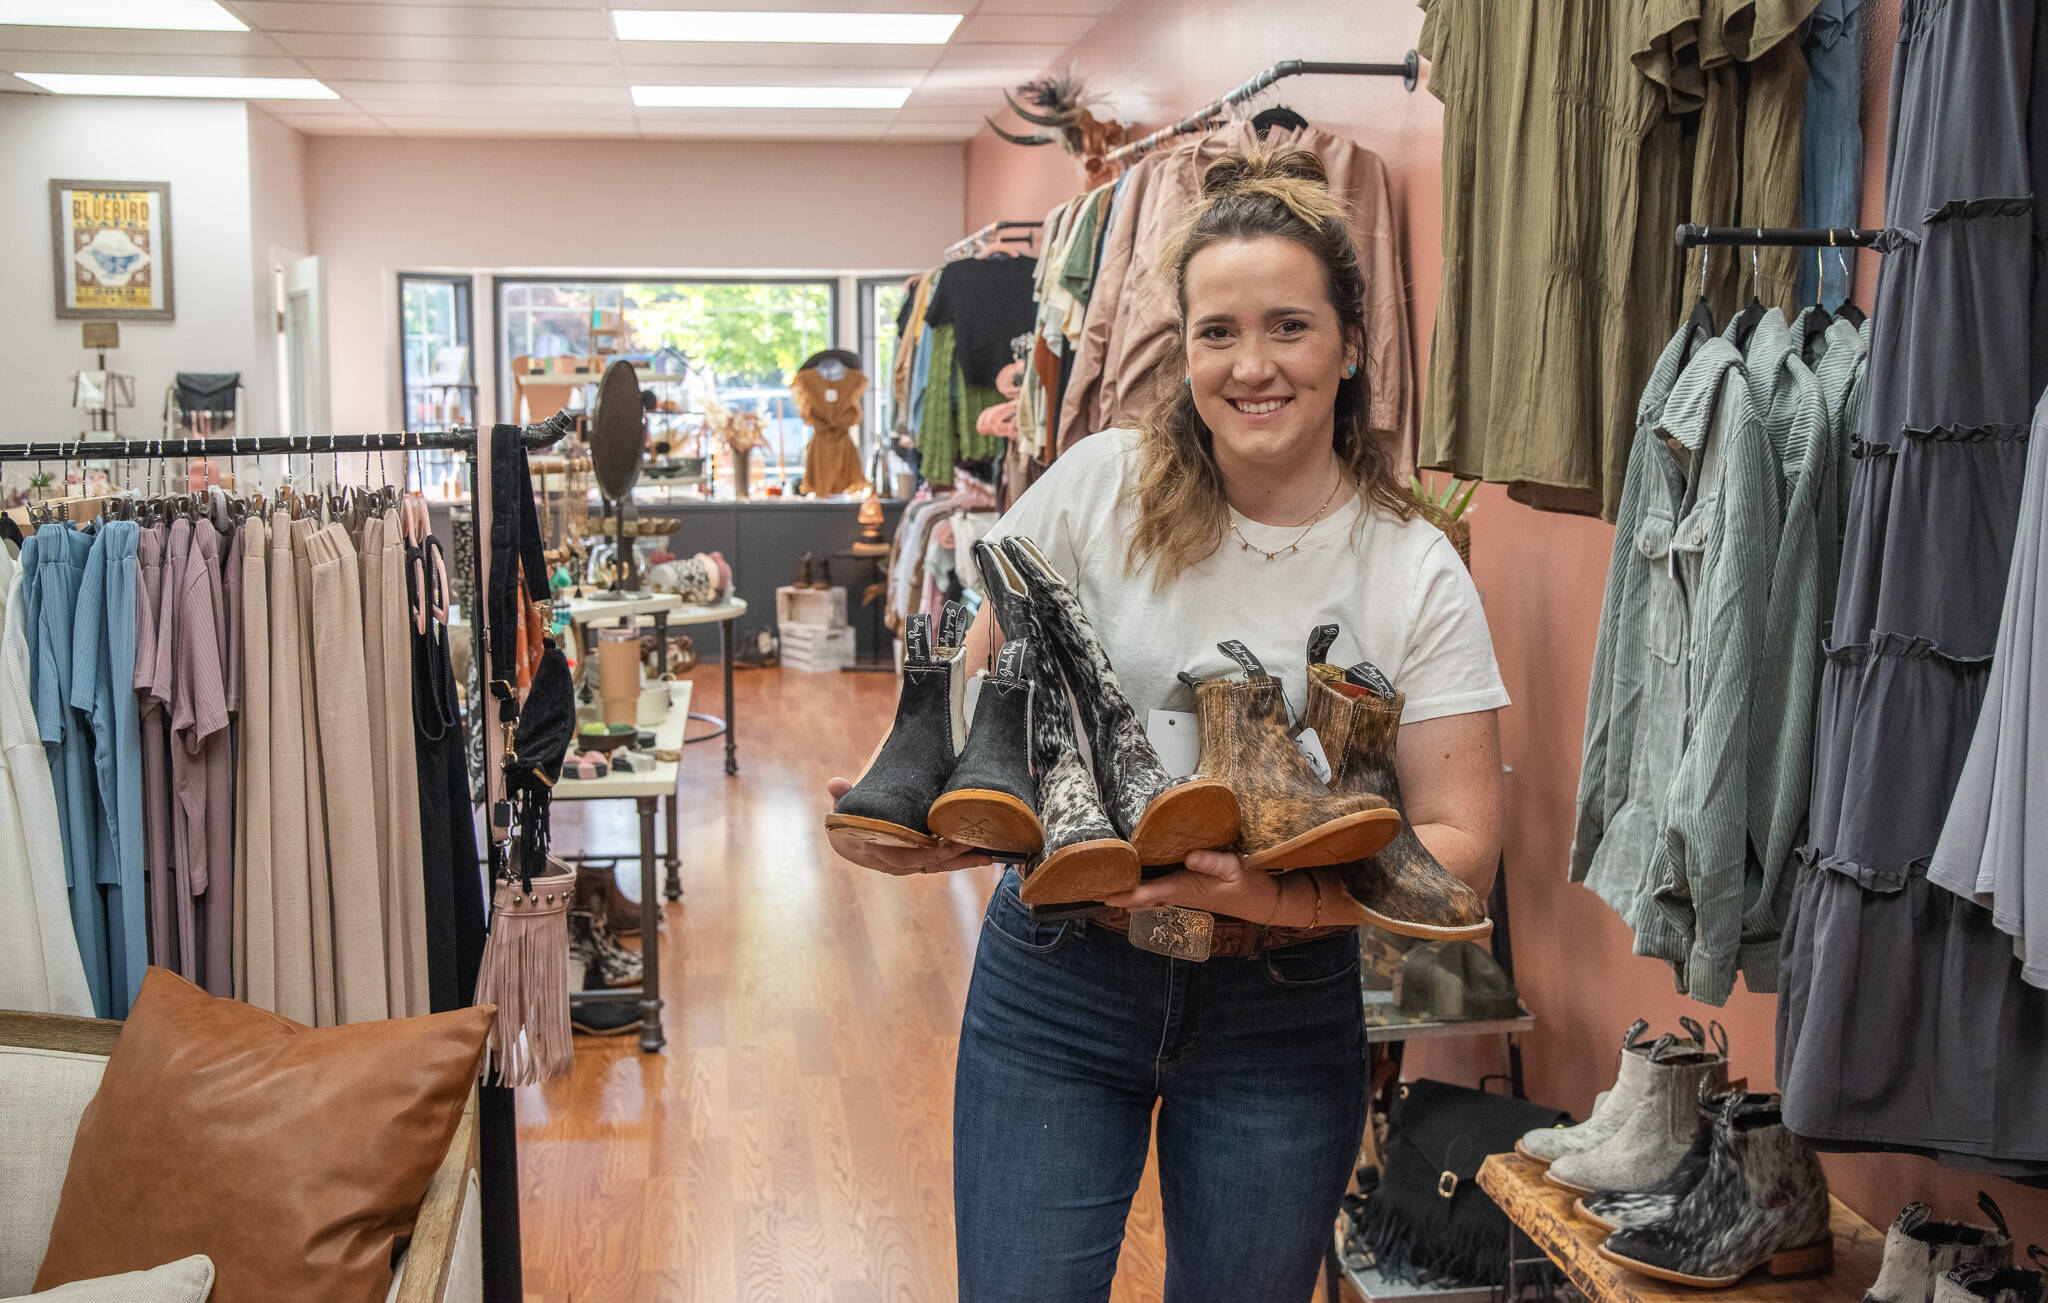 Sequim Gazette photoS by Emily Matthiessen
Kaila Martinez holds handmade cowboy boots for sale in her recently opened Western Wanderer Boutique on West Washington Street, next to Hurricane Coffee. Her clothing caters to all sizes and the boots are unisex.